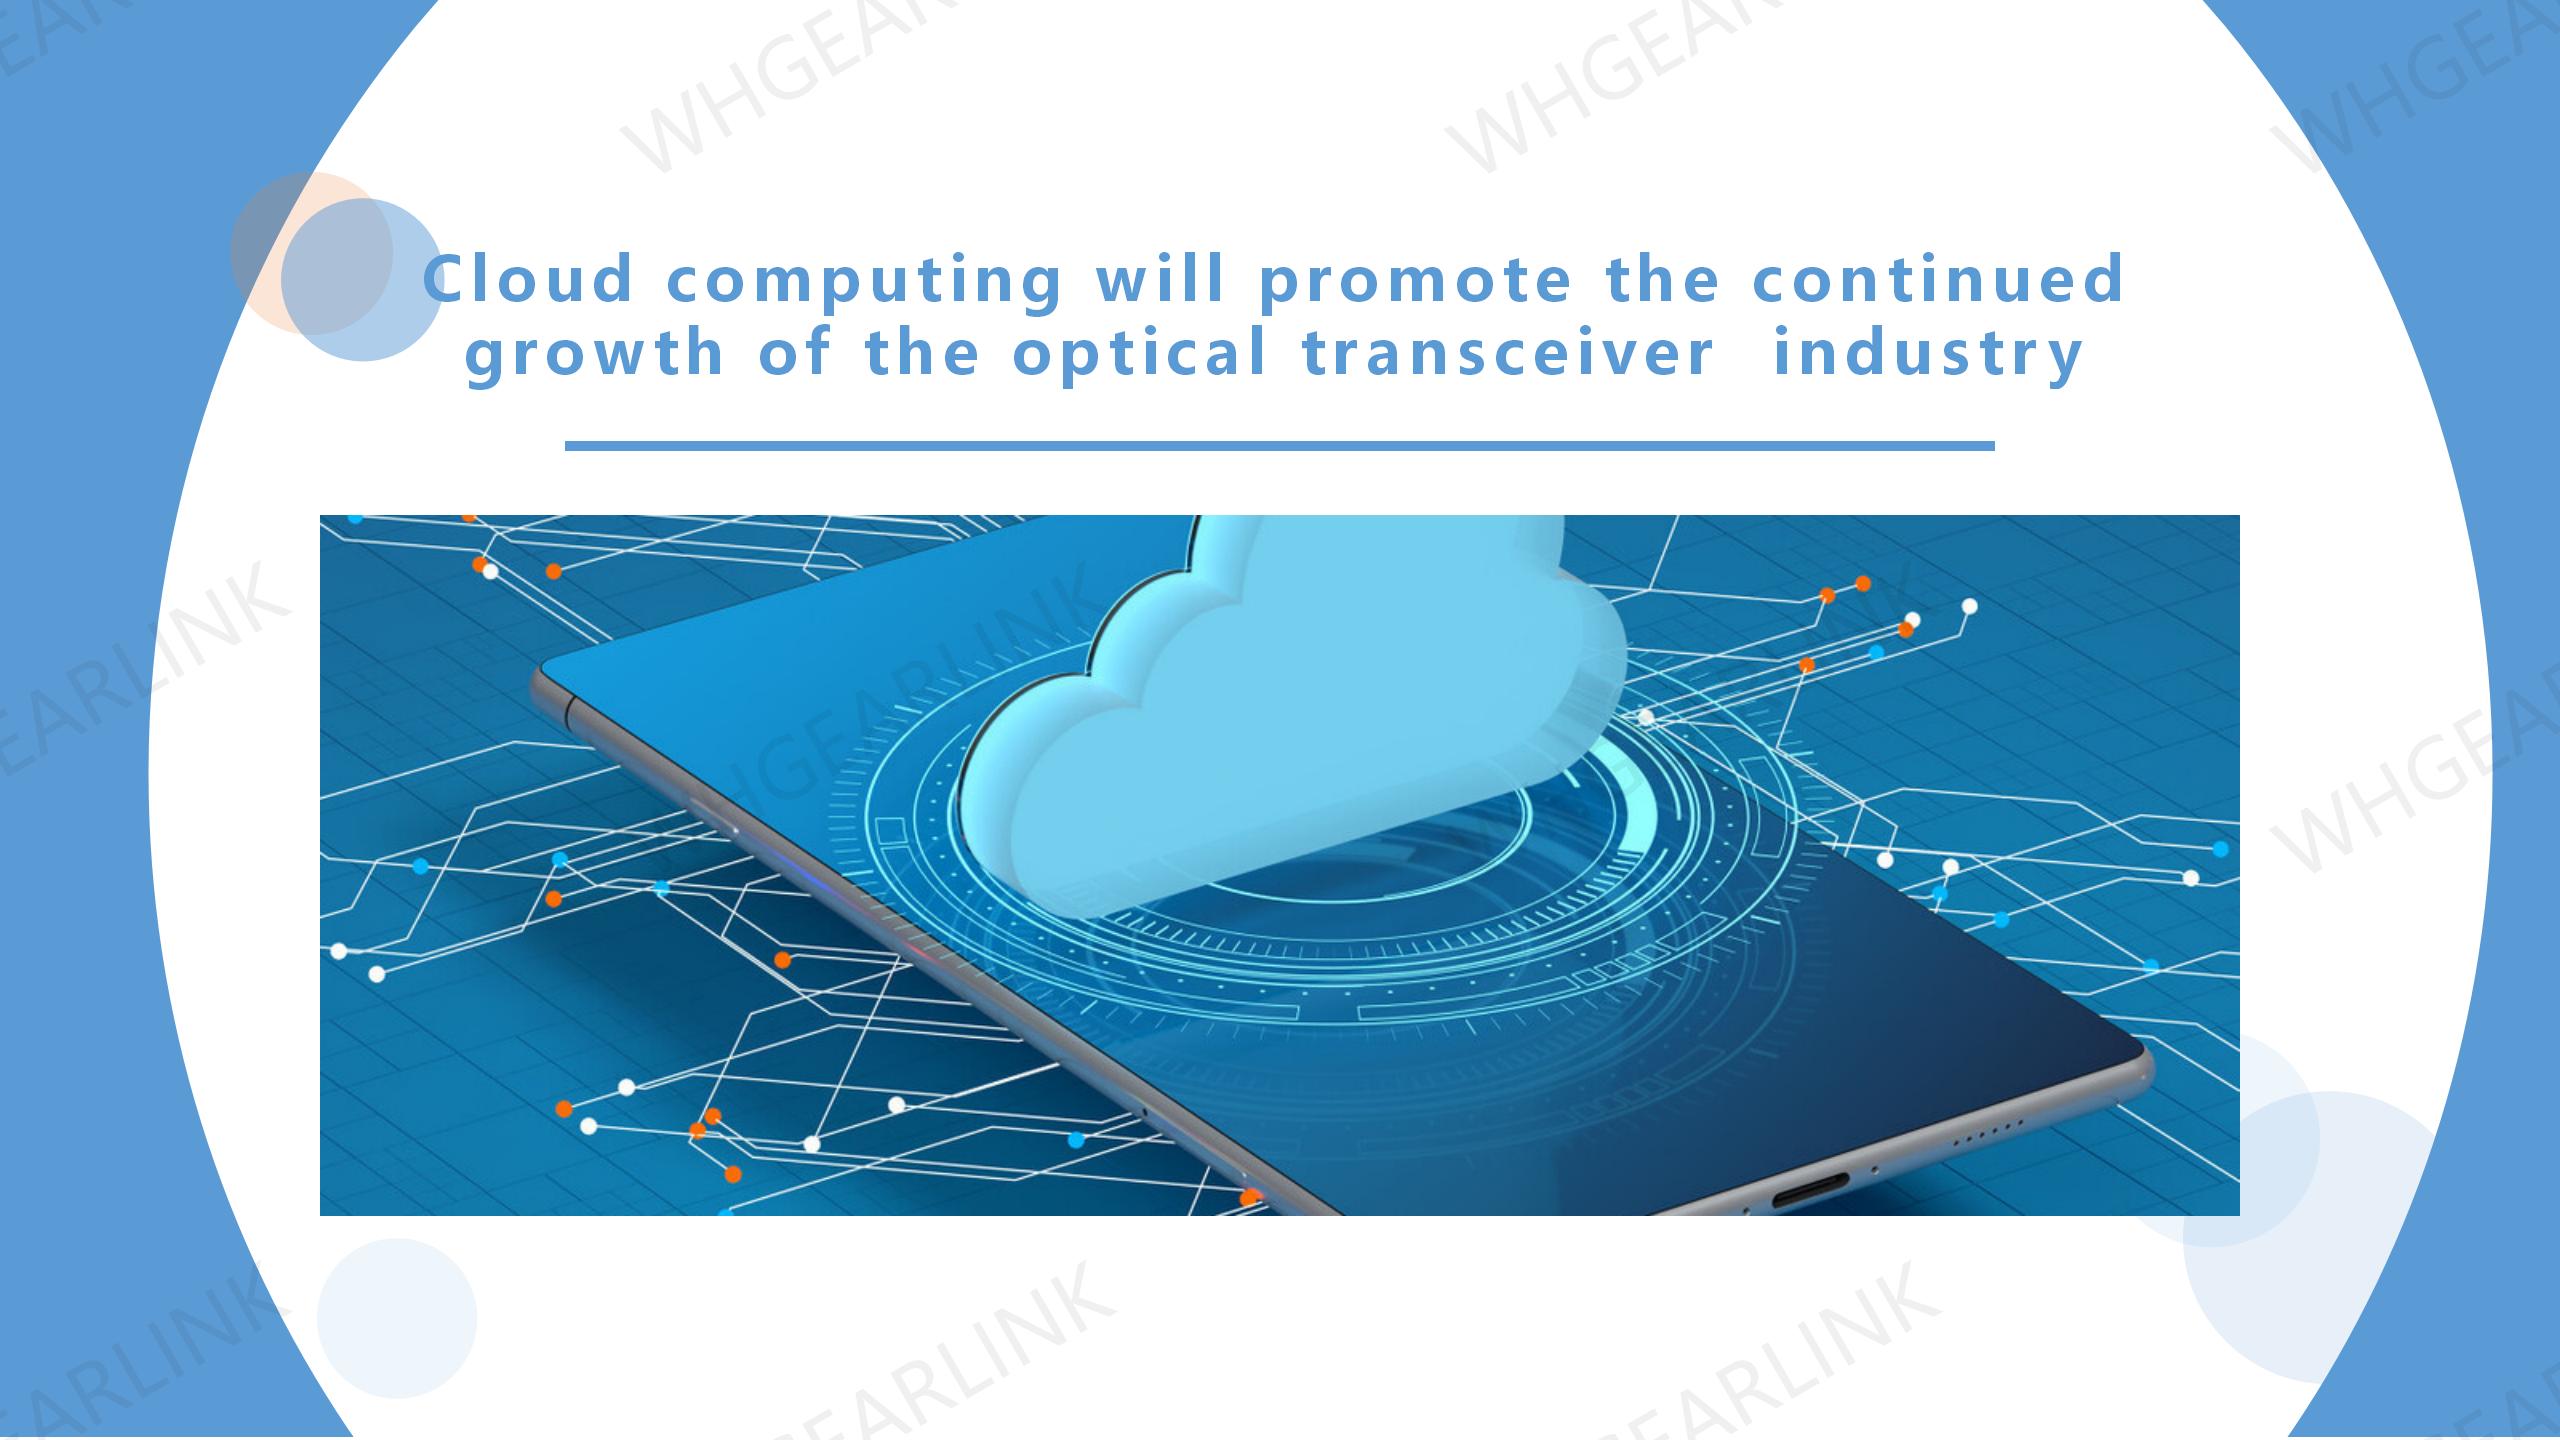 cloud-computing-will-promote-the-continued-growth-of-the-optical-transceiver-industry.jpg